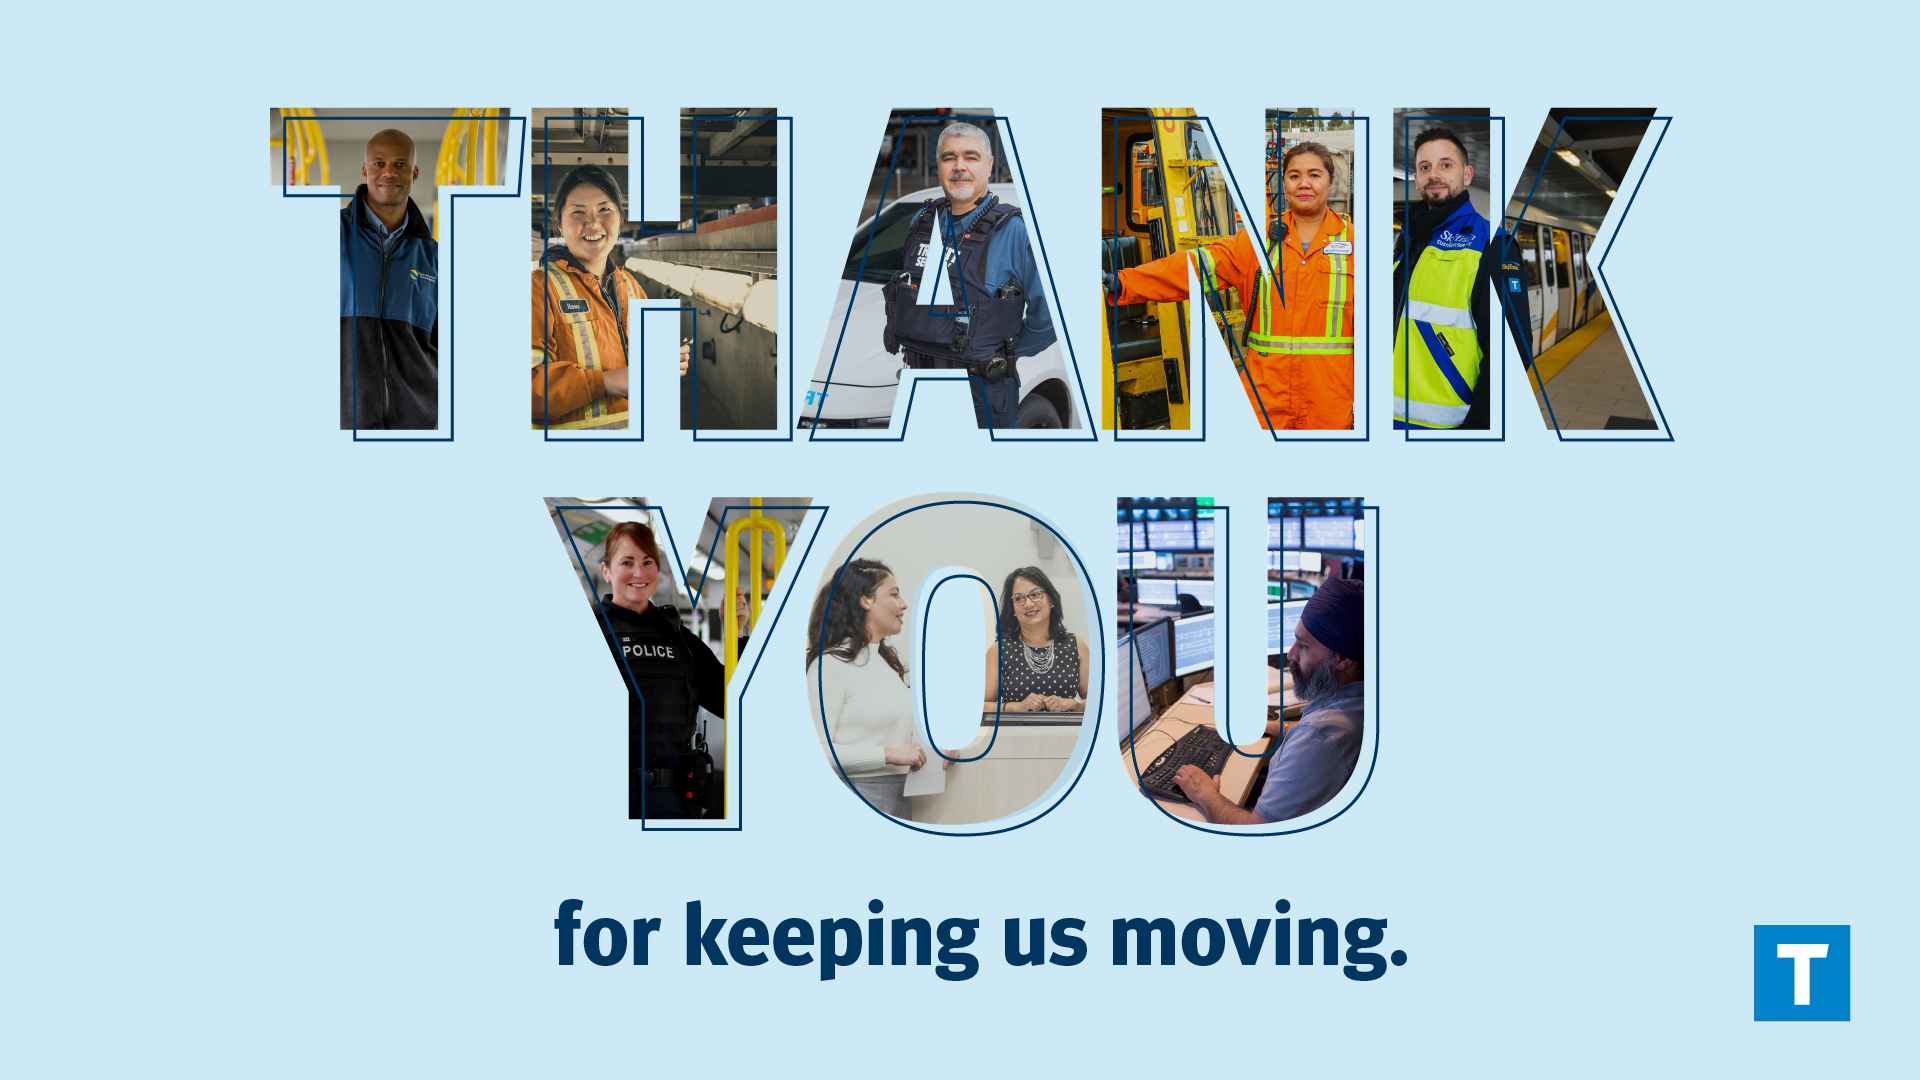 Collage of employee photos and with text saying "thank you for keeping us moving"